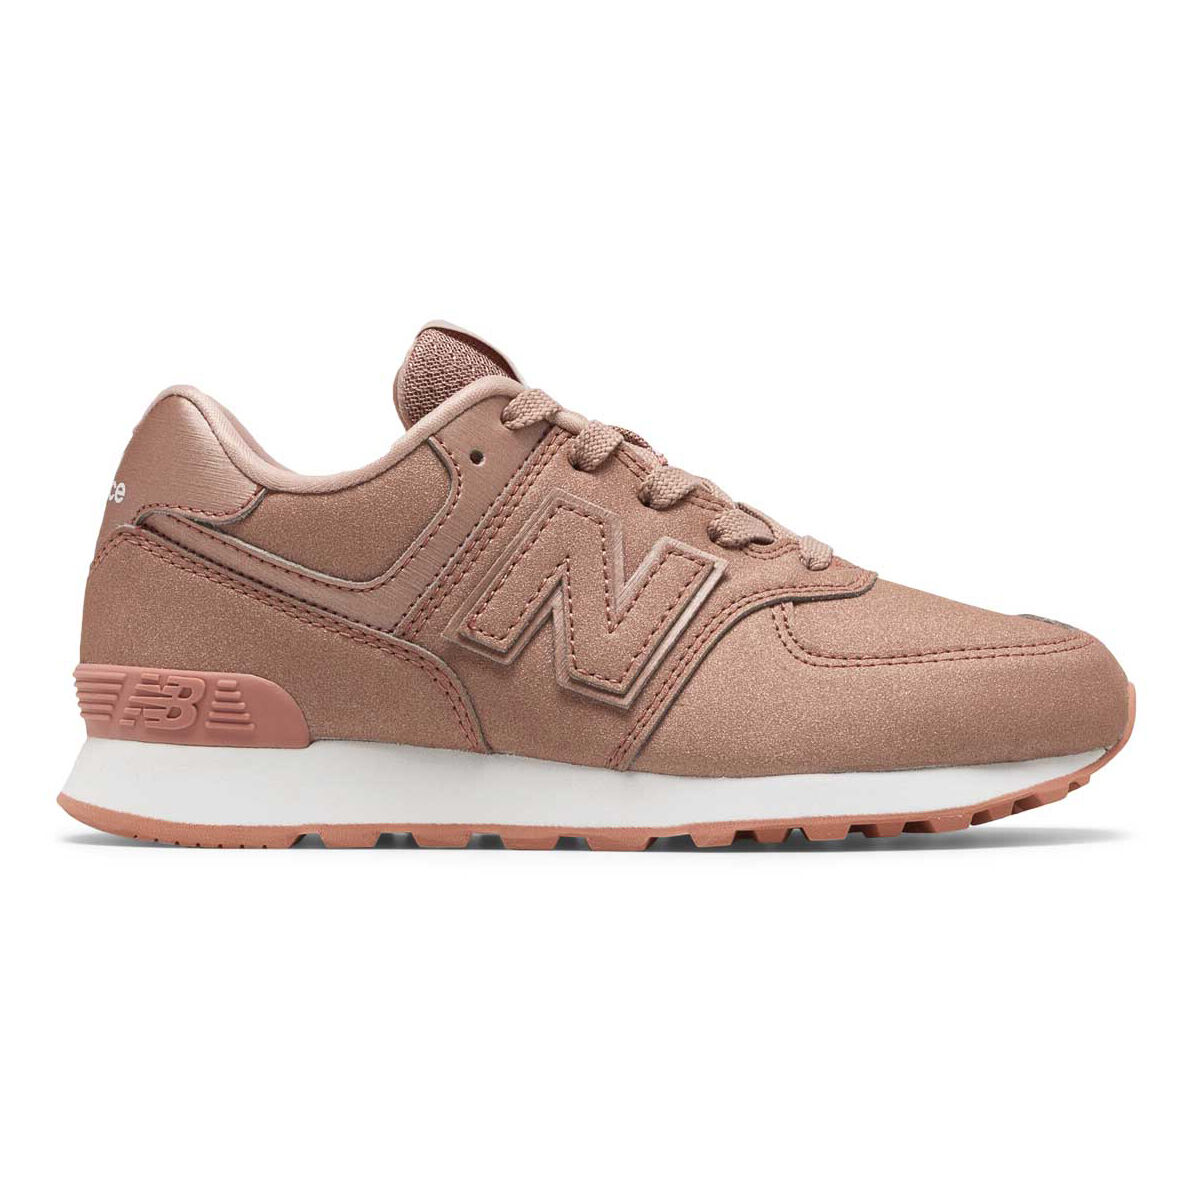 New Balance 574 Kids Casual Shoes Pink 